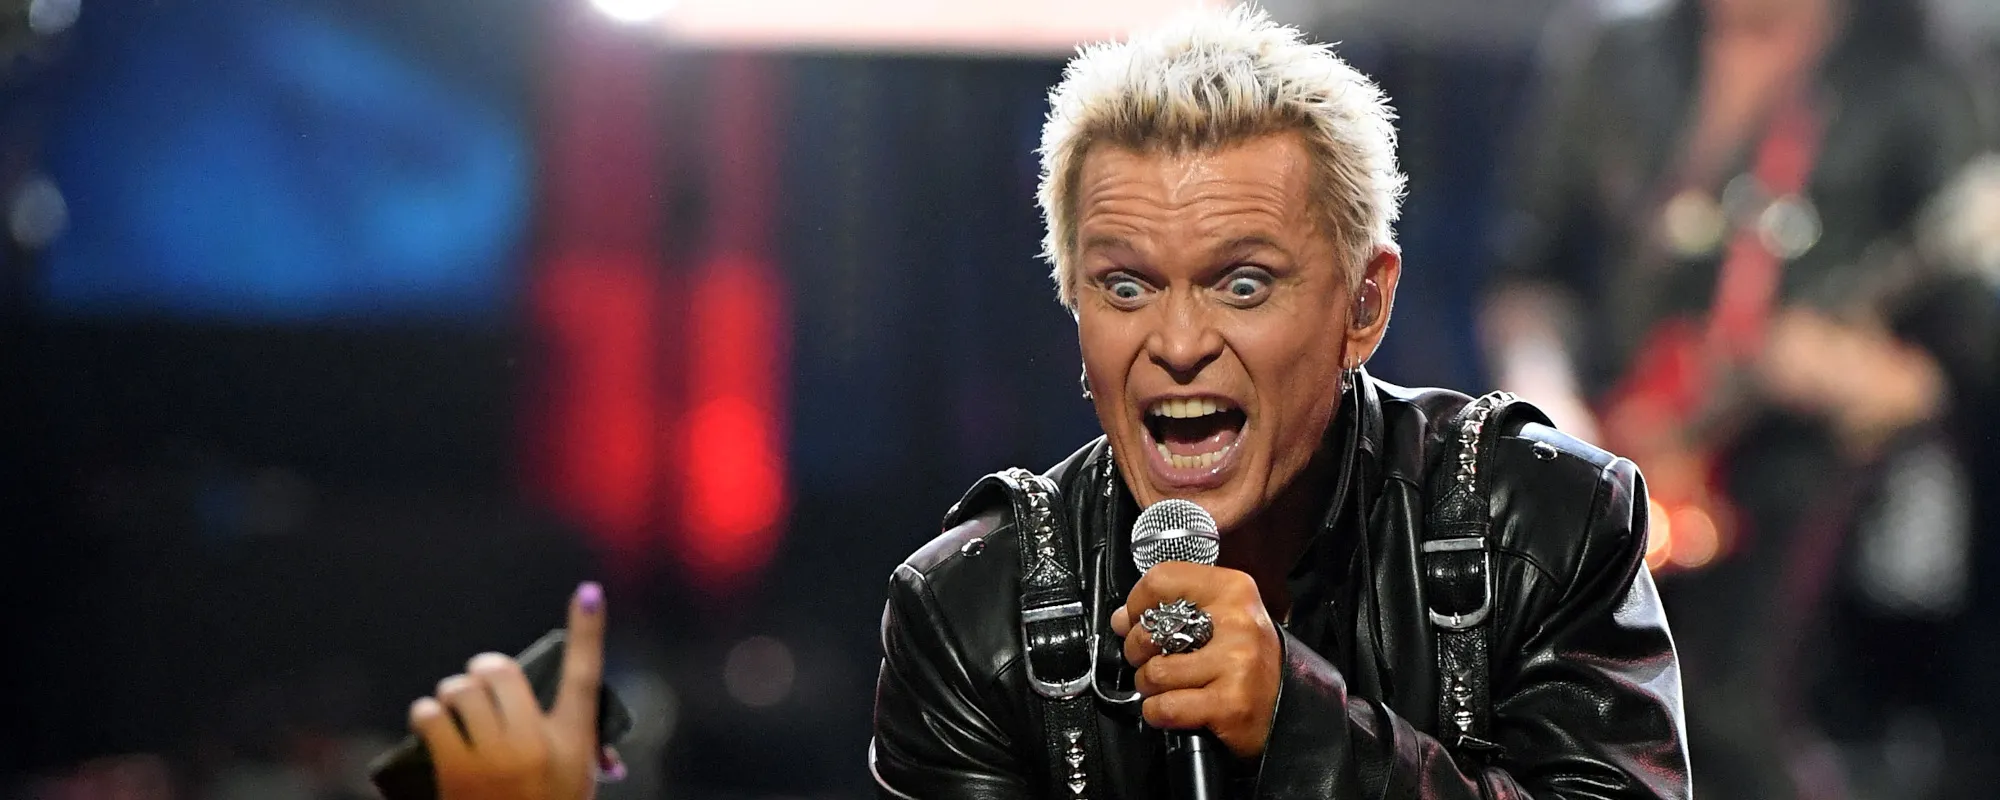 What If the Theme to “The Breakfast Club” Had Been Done by Billy Idol?